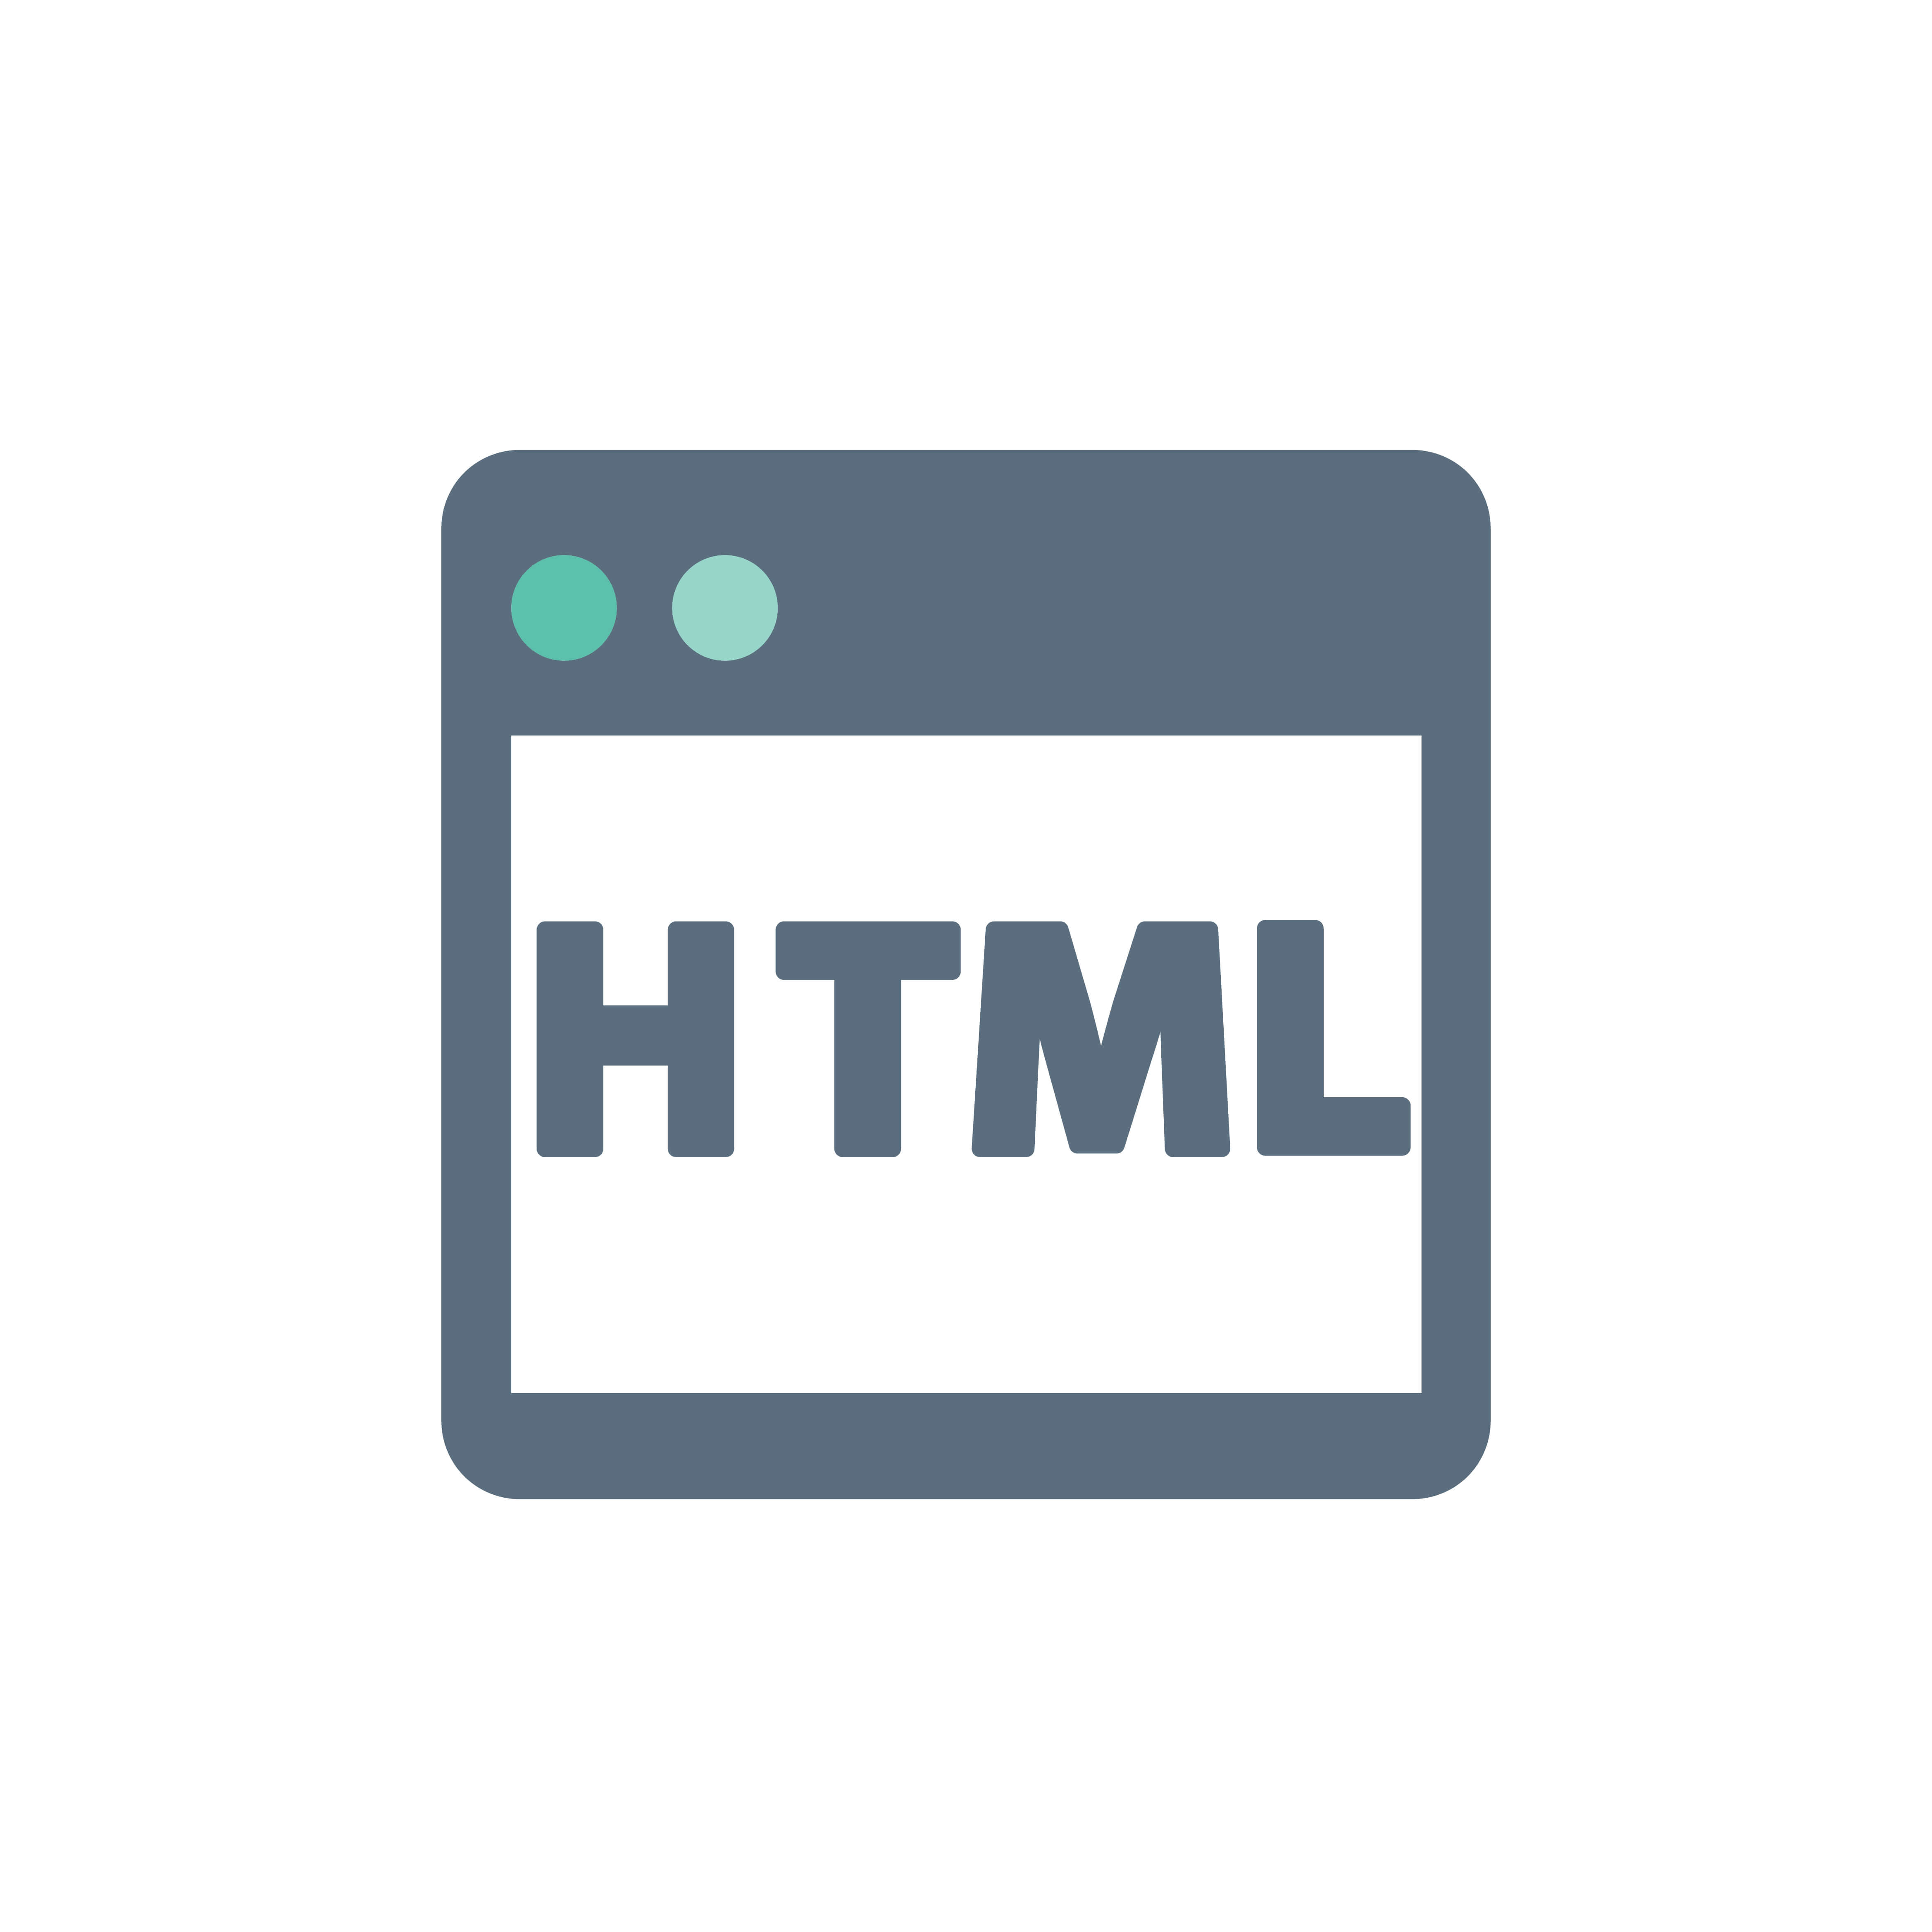 Is HTML becoming obsolete